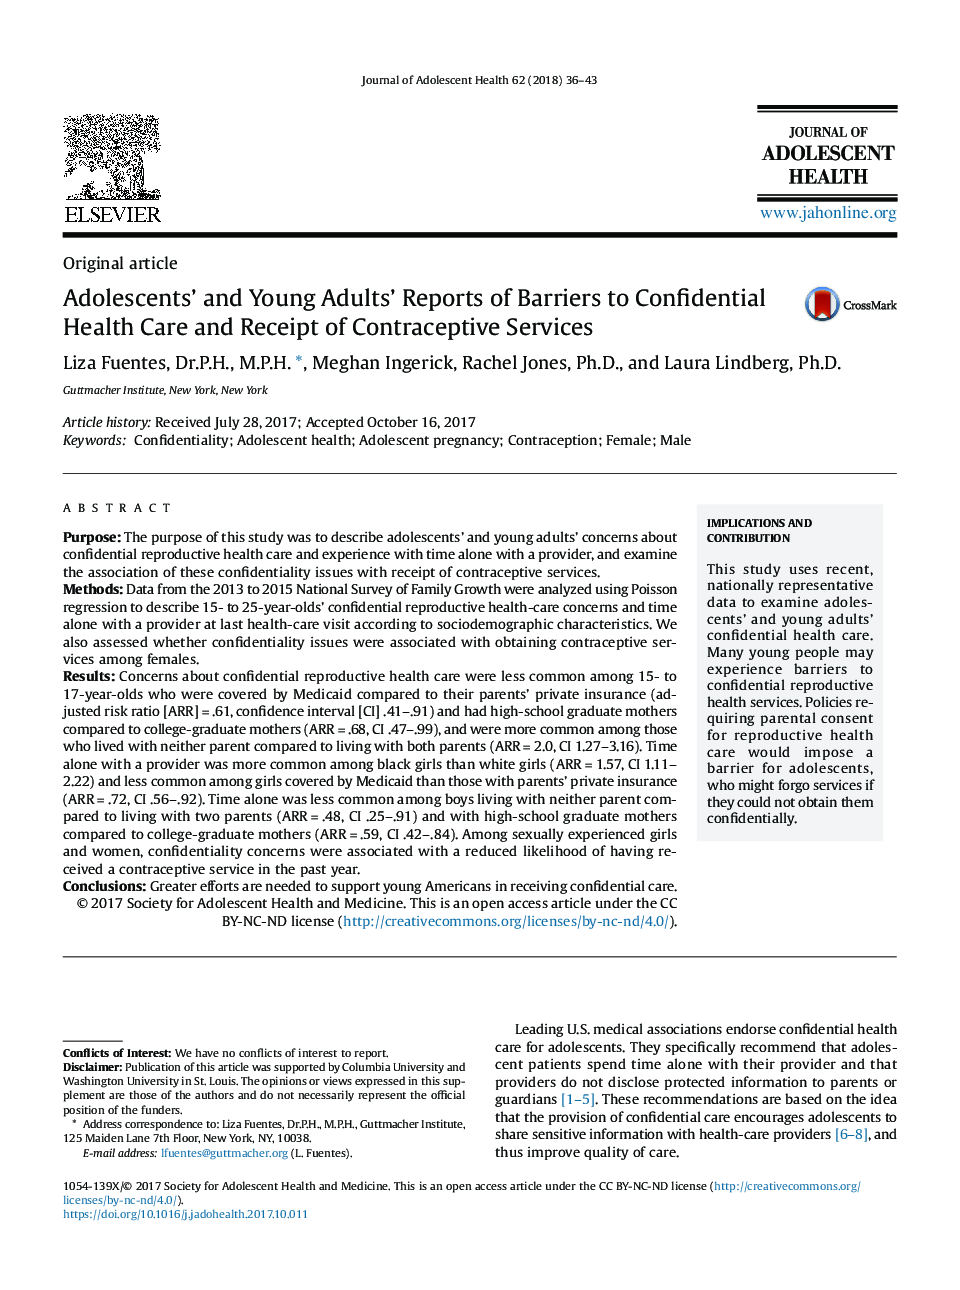 Adolescents' and Young Adults' Reports of Barriers to Confidential Health Care and Receipt of Contraceptive Services